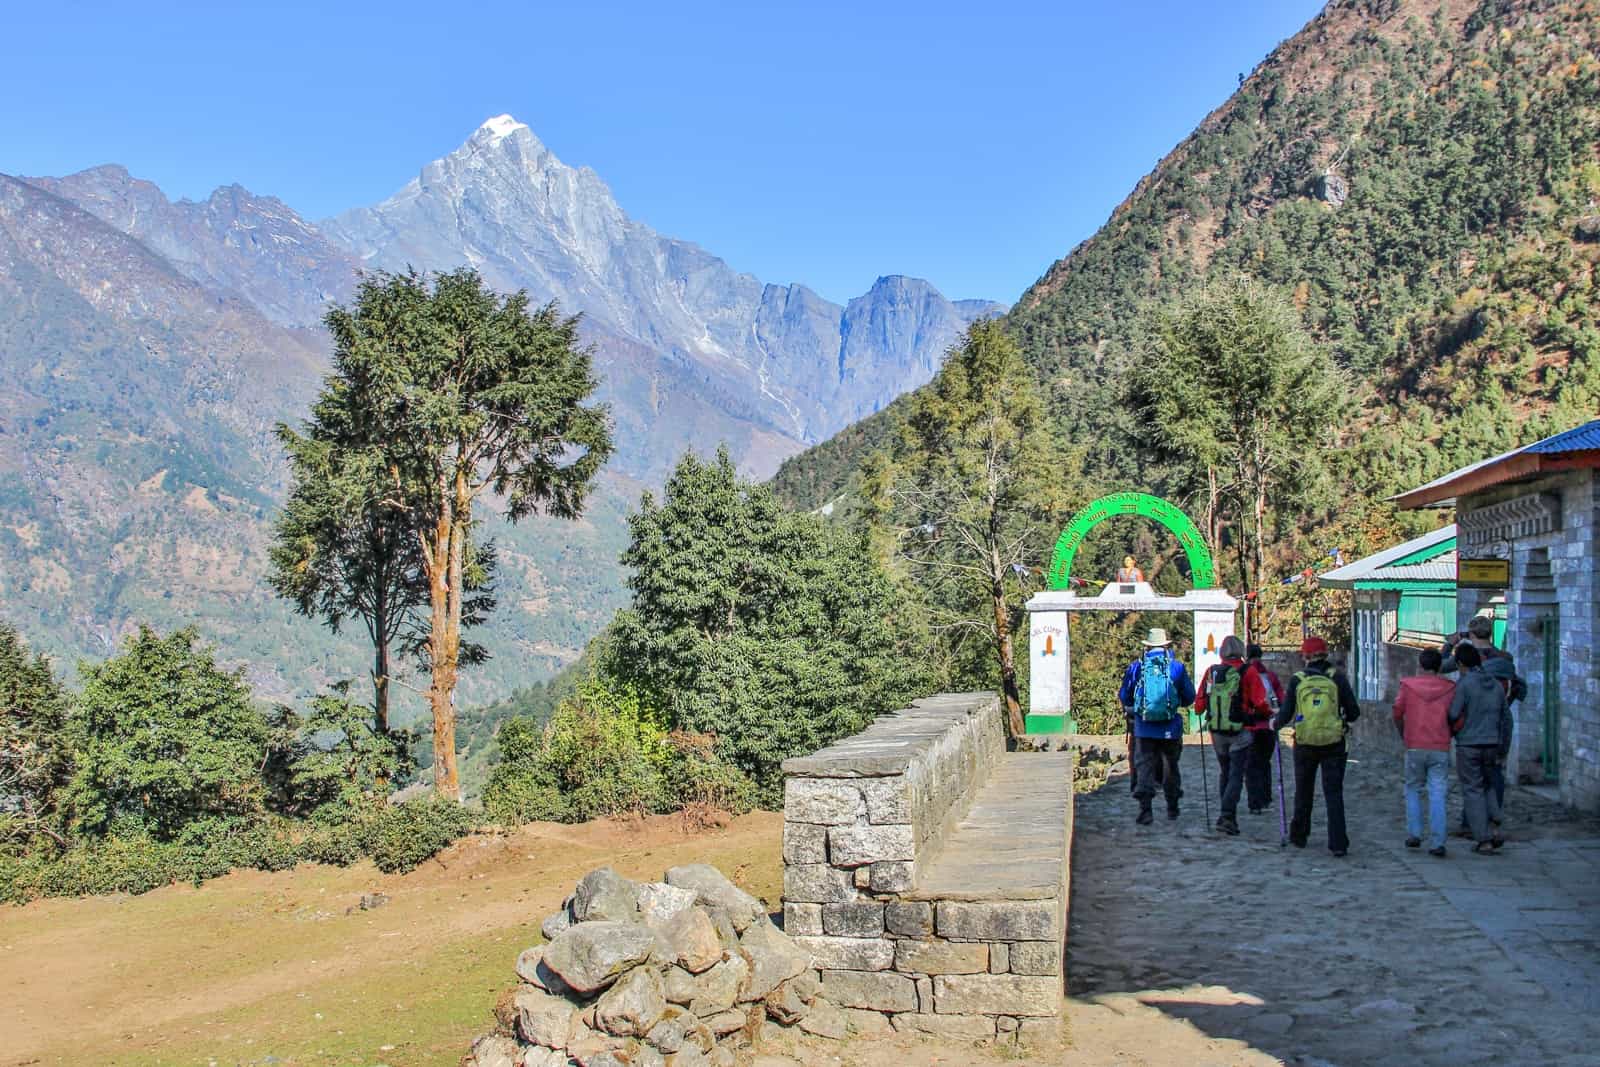 A small group of people walking on a stone path towards a white gate with a green arch - the starting gate of the Everest Base Camp trek in Lukla that looks towards the green forest and the Himalaya mountains